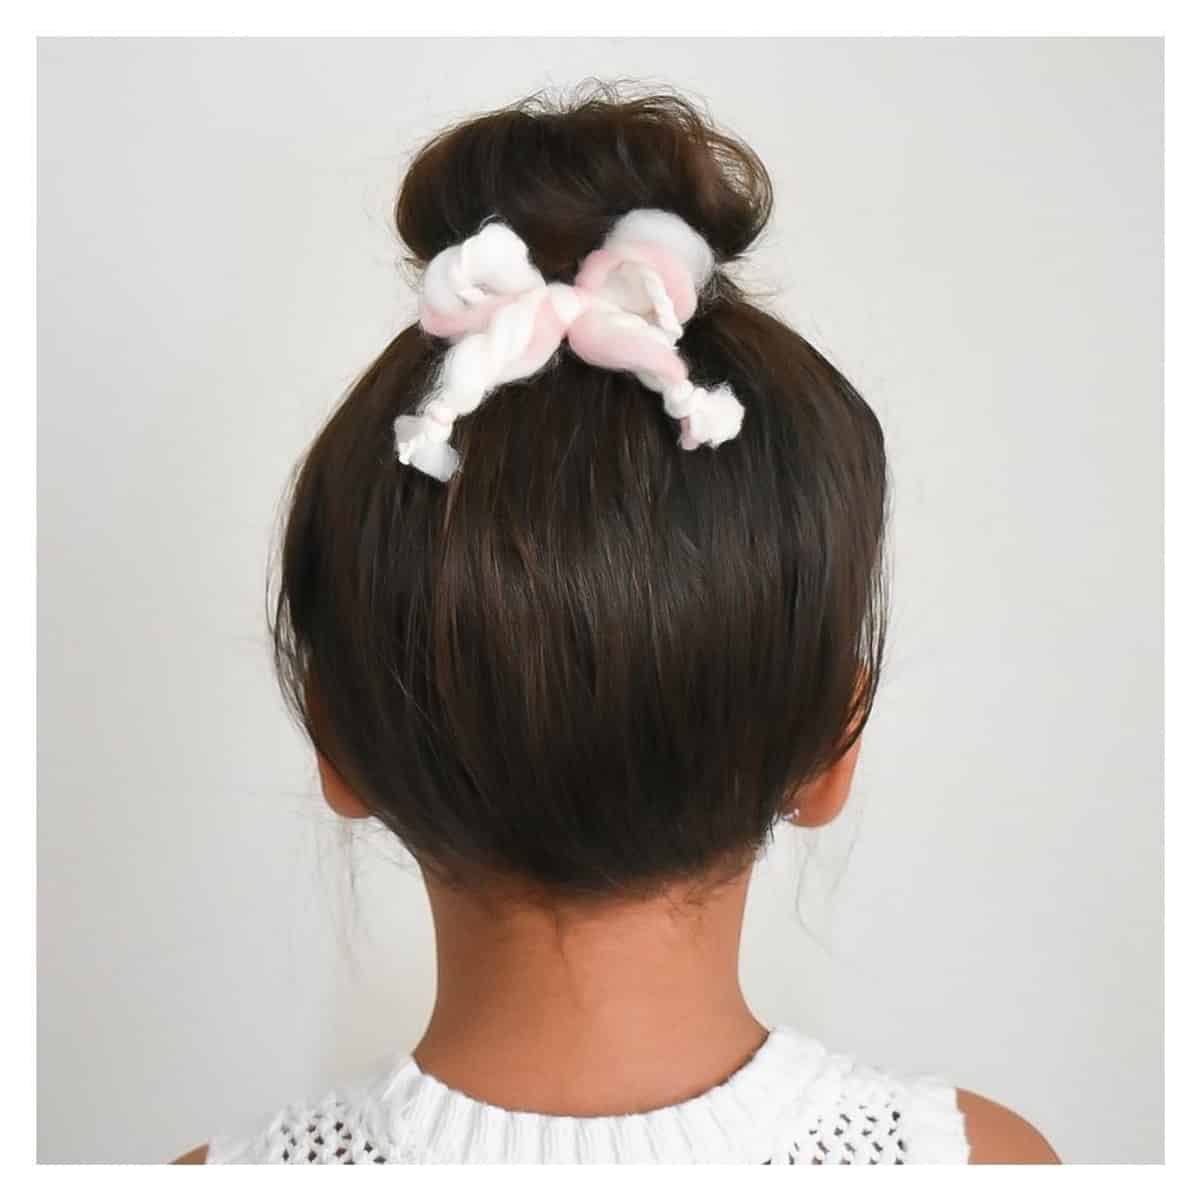 Short top knot style for a toddler